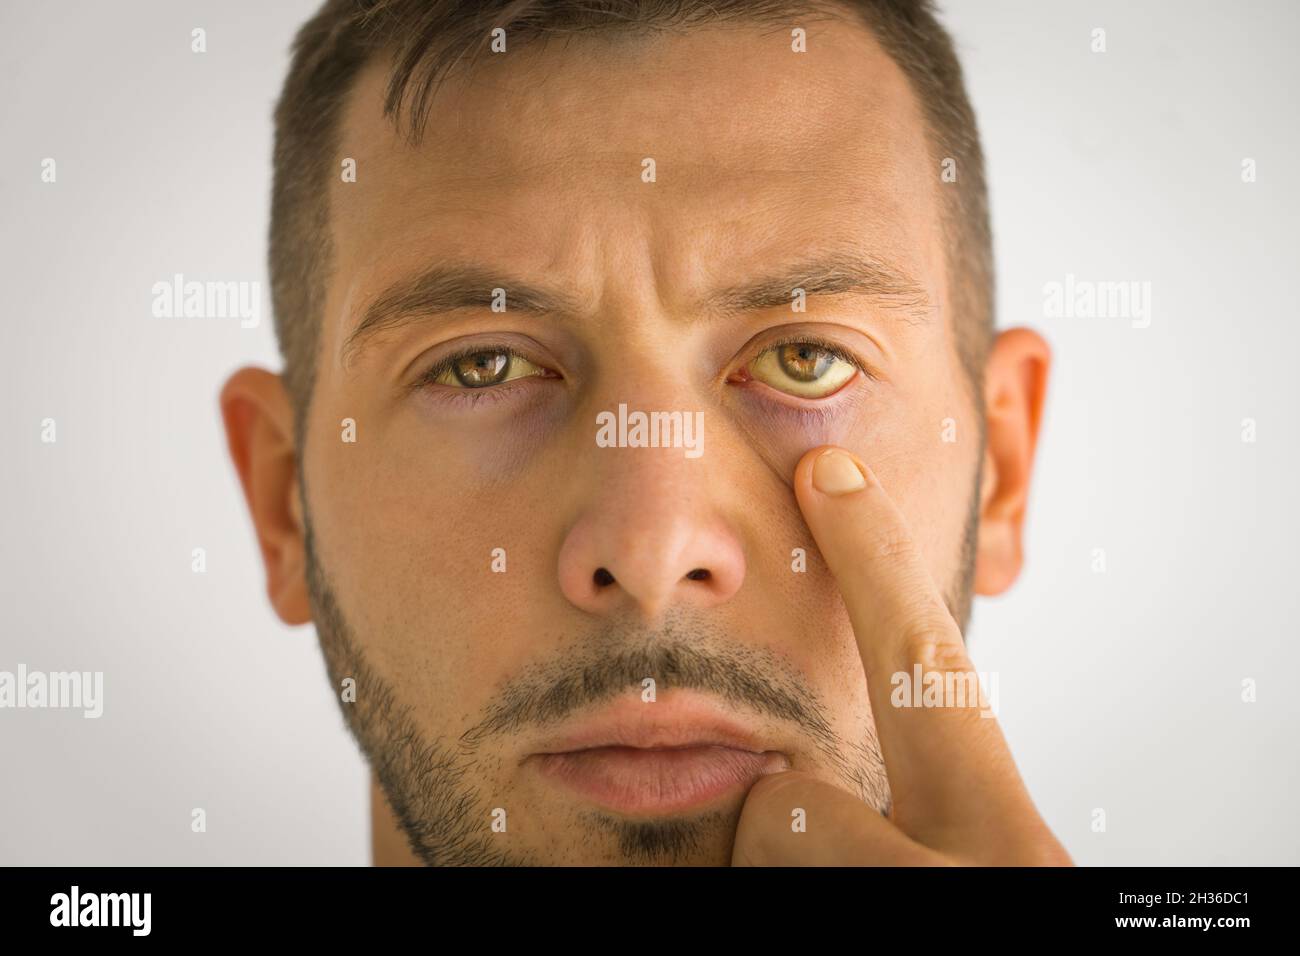 Sick man with yellow eyes. Liver disease. Problems with liver. Jaundice Stock Photo